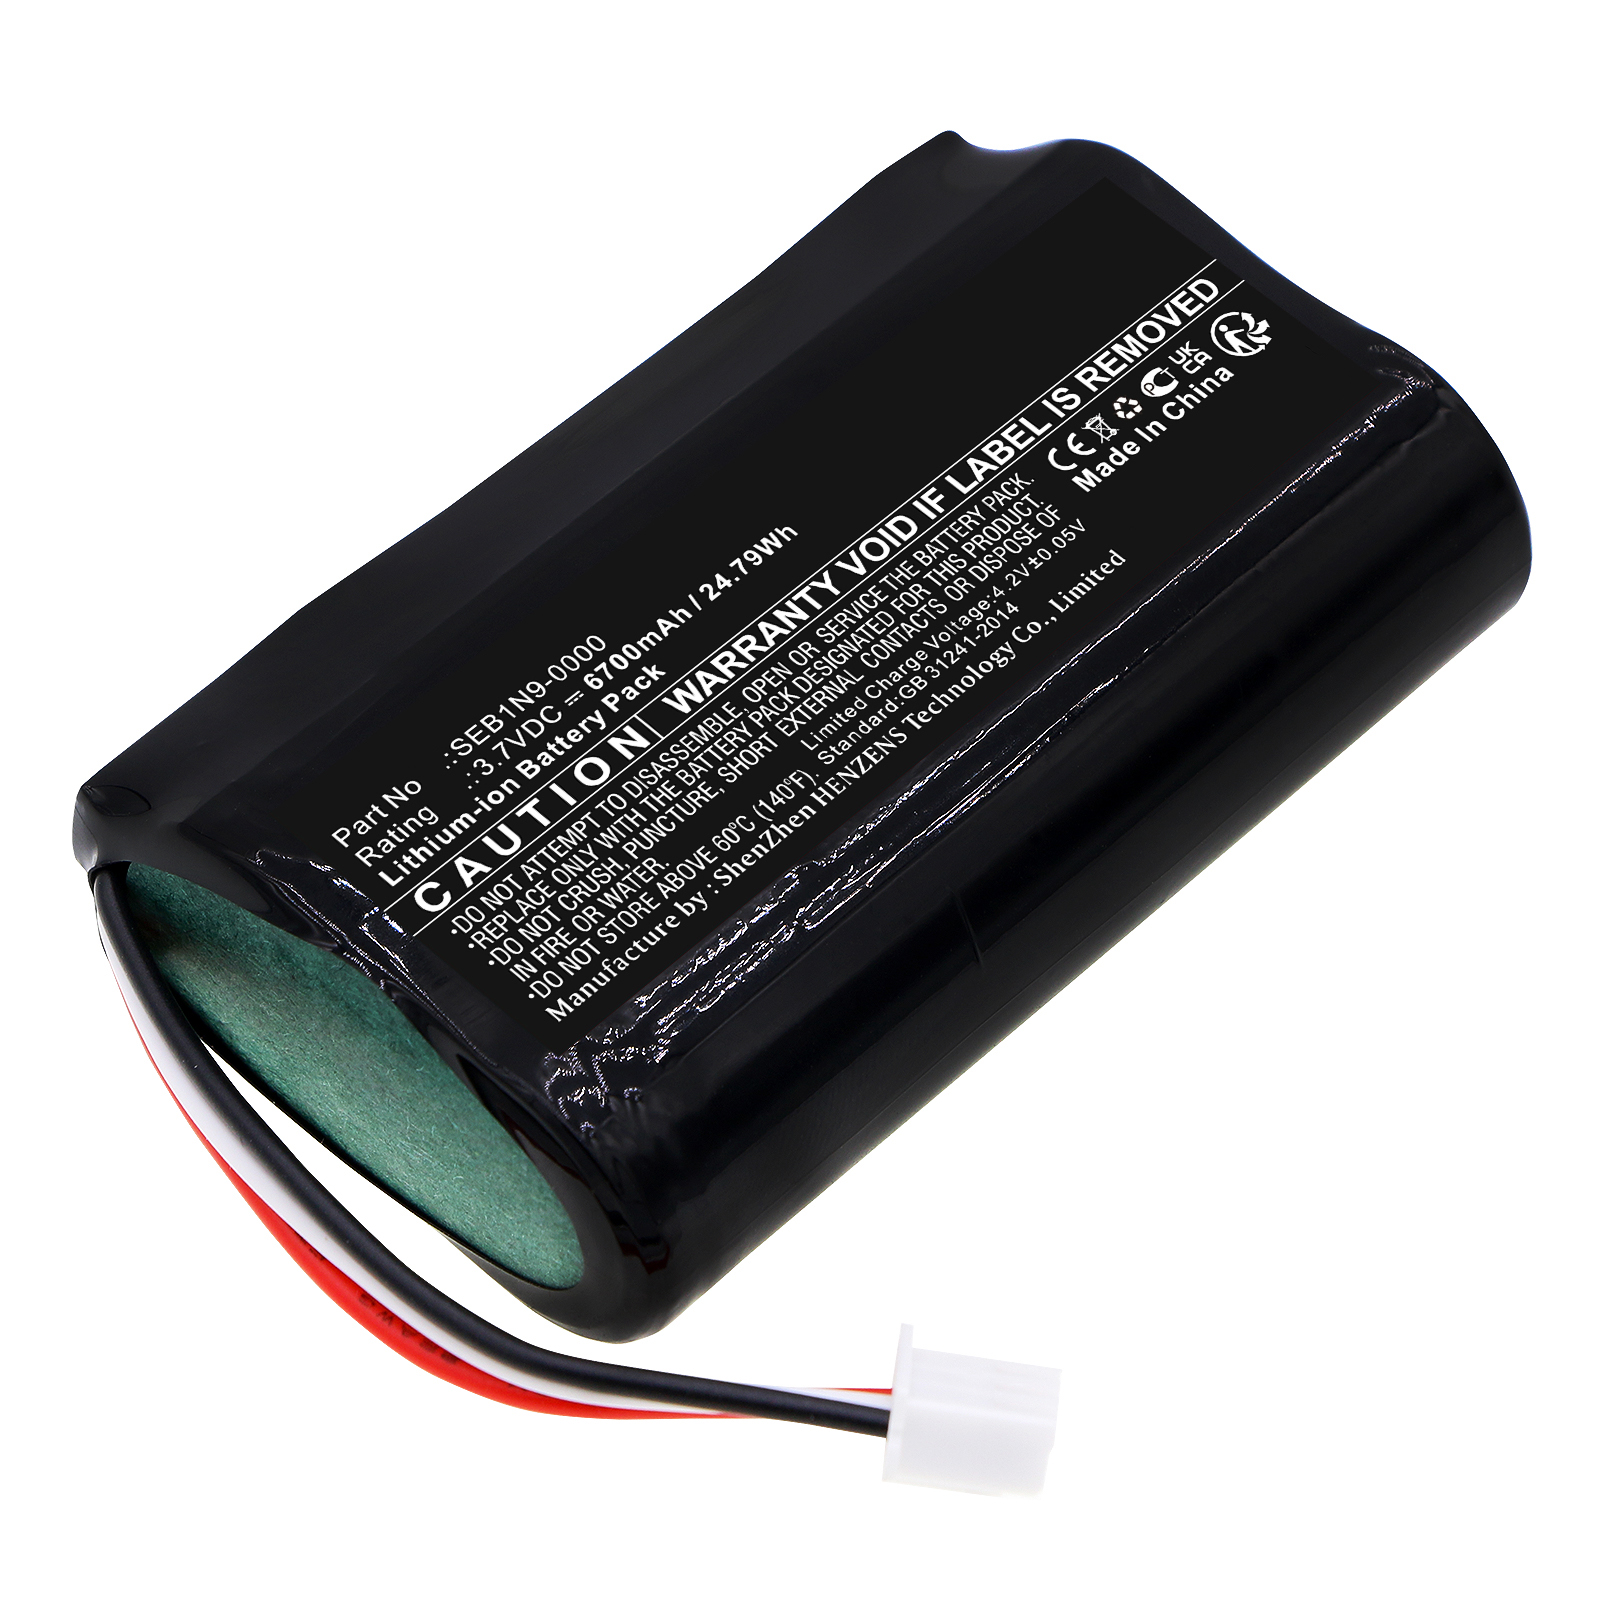 Batteries for RingHome Security Camera